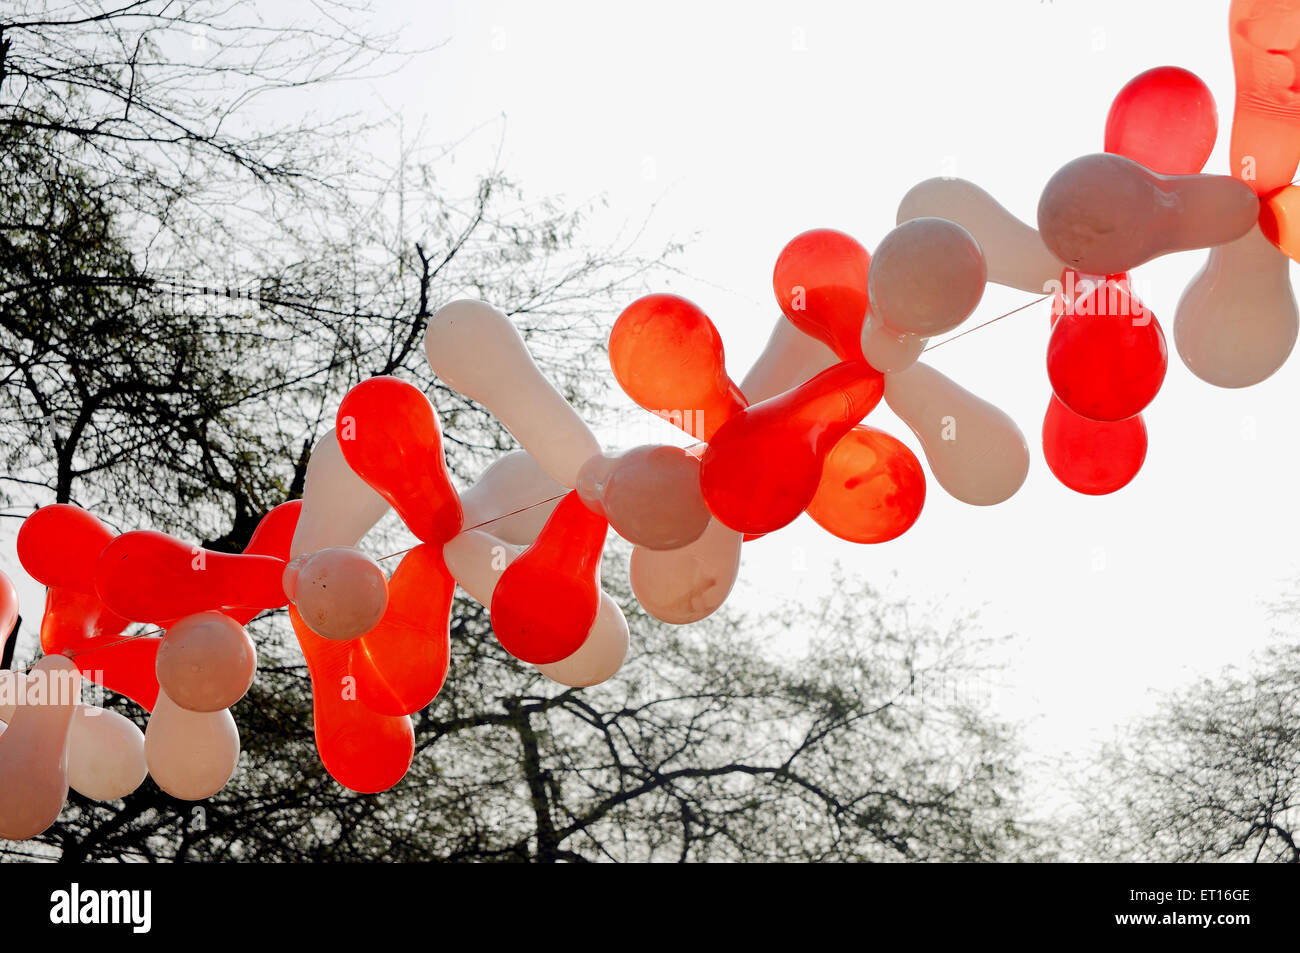 Red and white balloons ; India Stock Photo